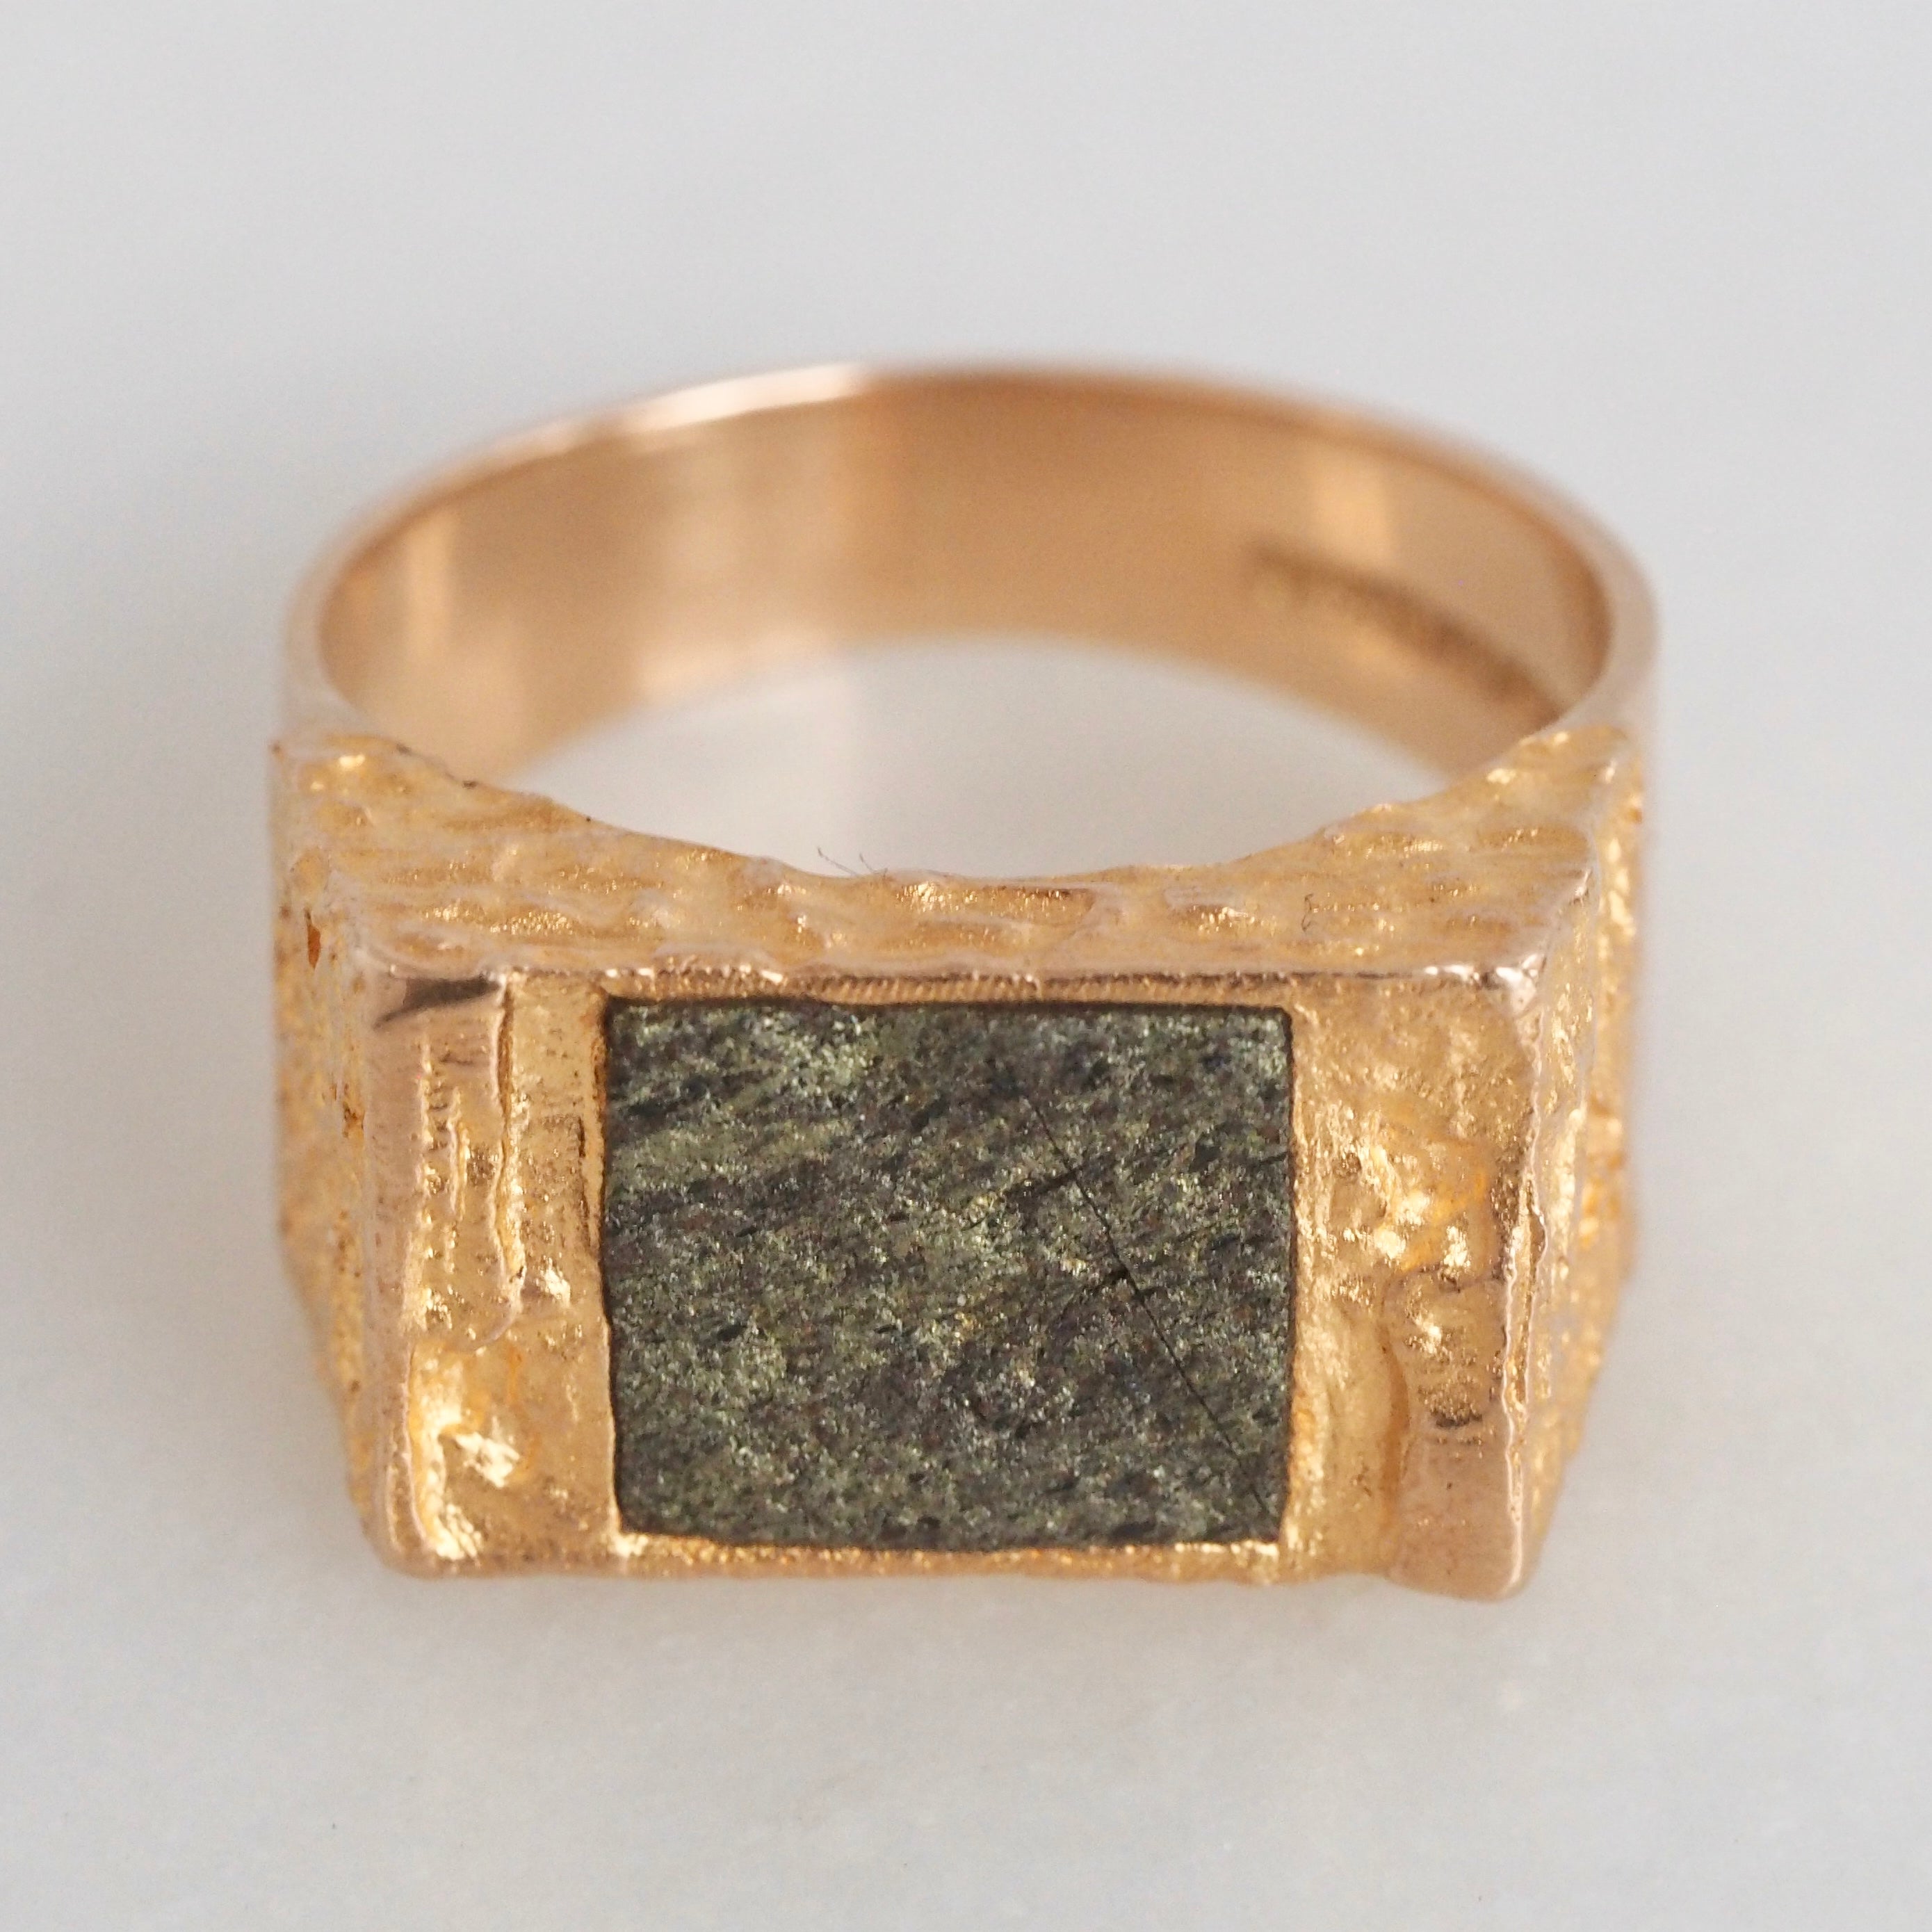 Vintage Modernist Pyrite and 14k Gold Ring by Björn Weckström for Lapponia